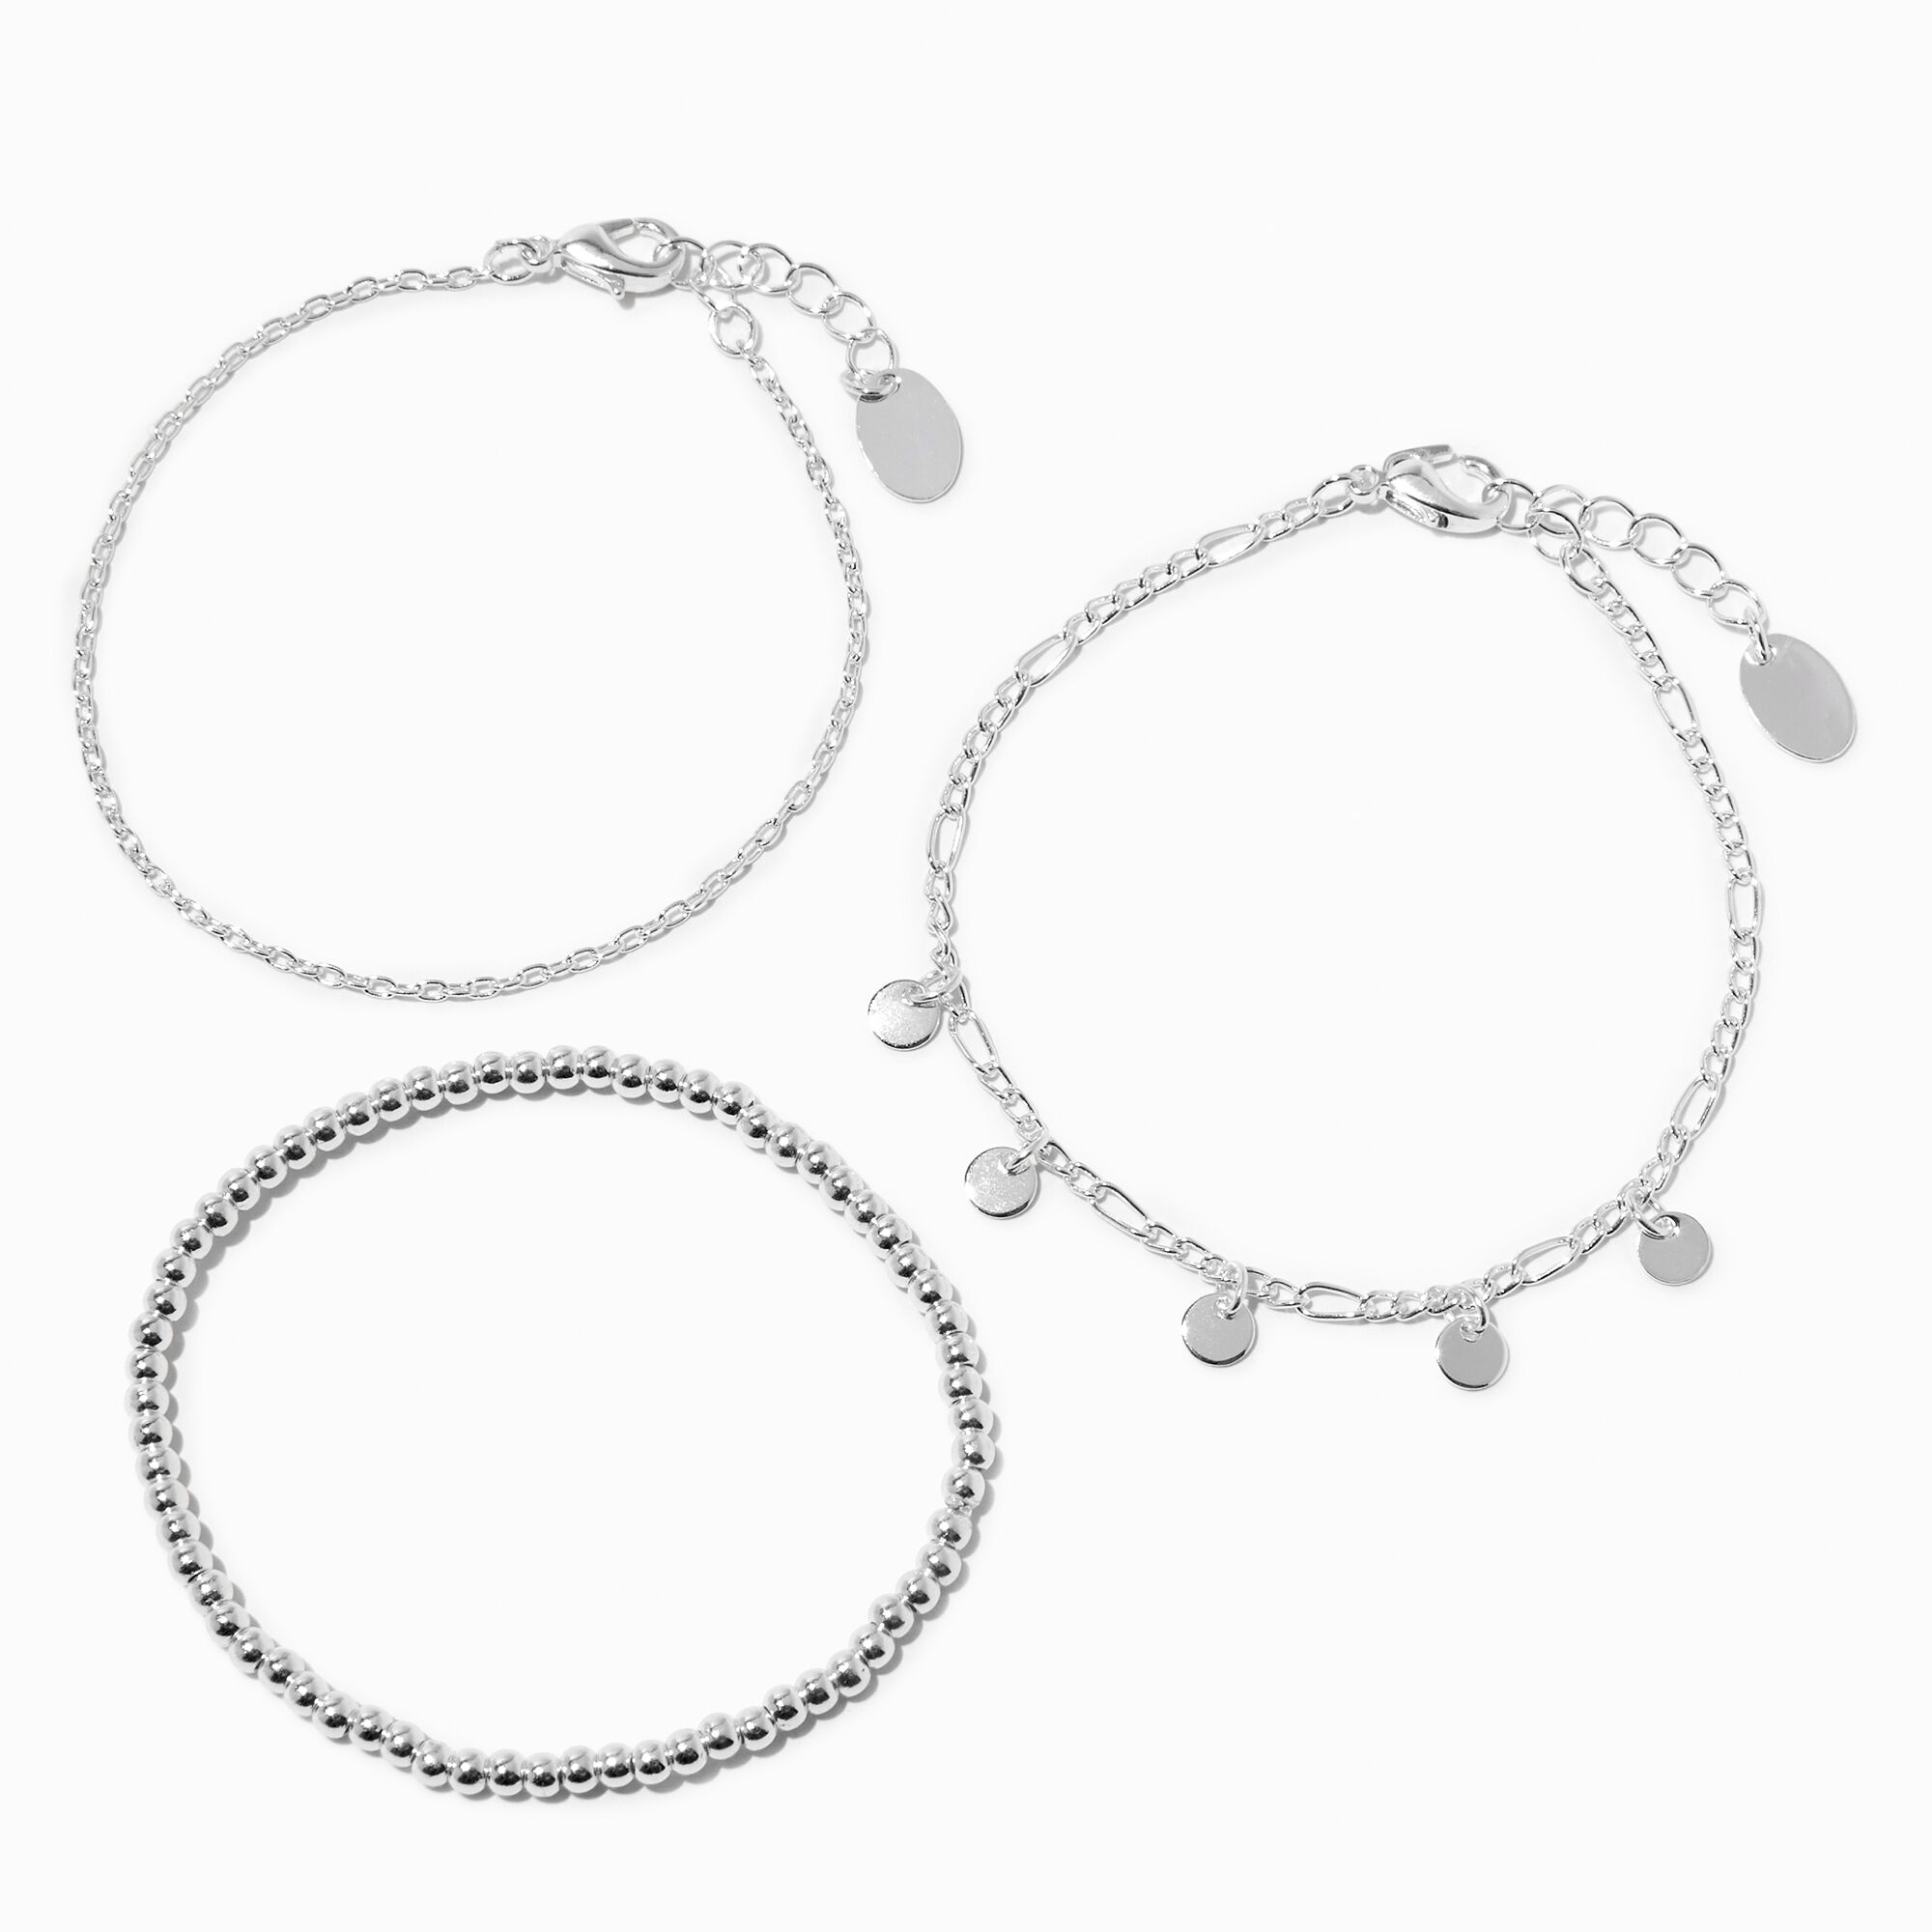 View Claires Recycled Jewelry Tone Disc Charm Bracelet Set 3 Pack Silver information